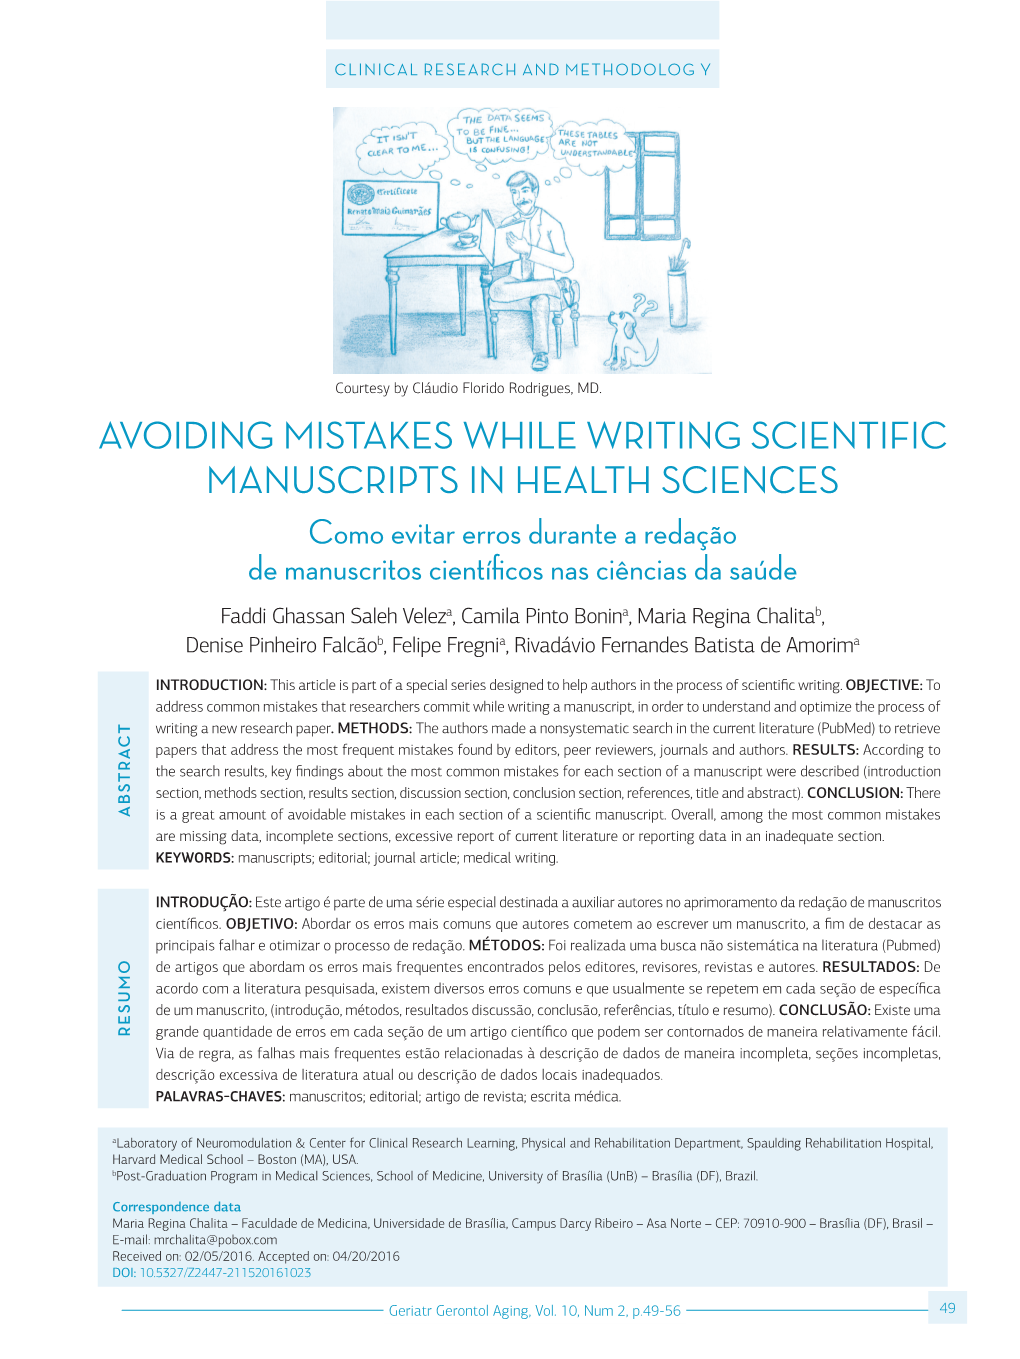 Avoiding Mistakes While Writing Scientific Manuscripts in Health